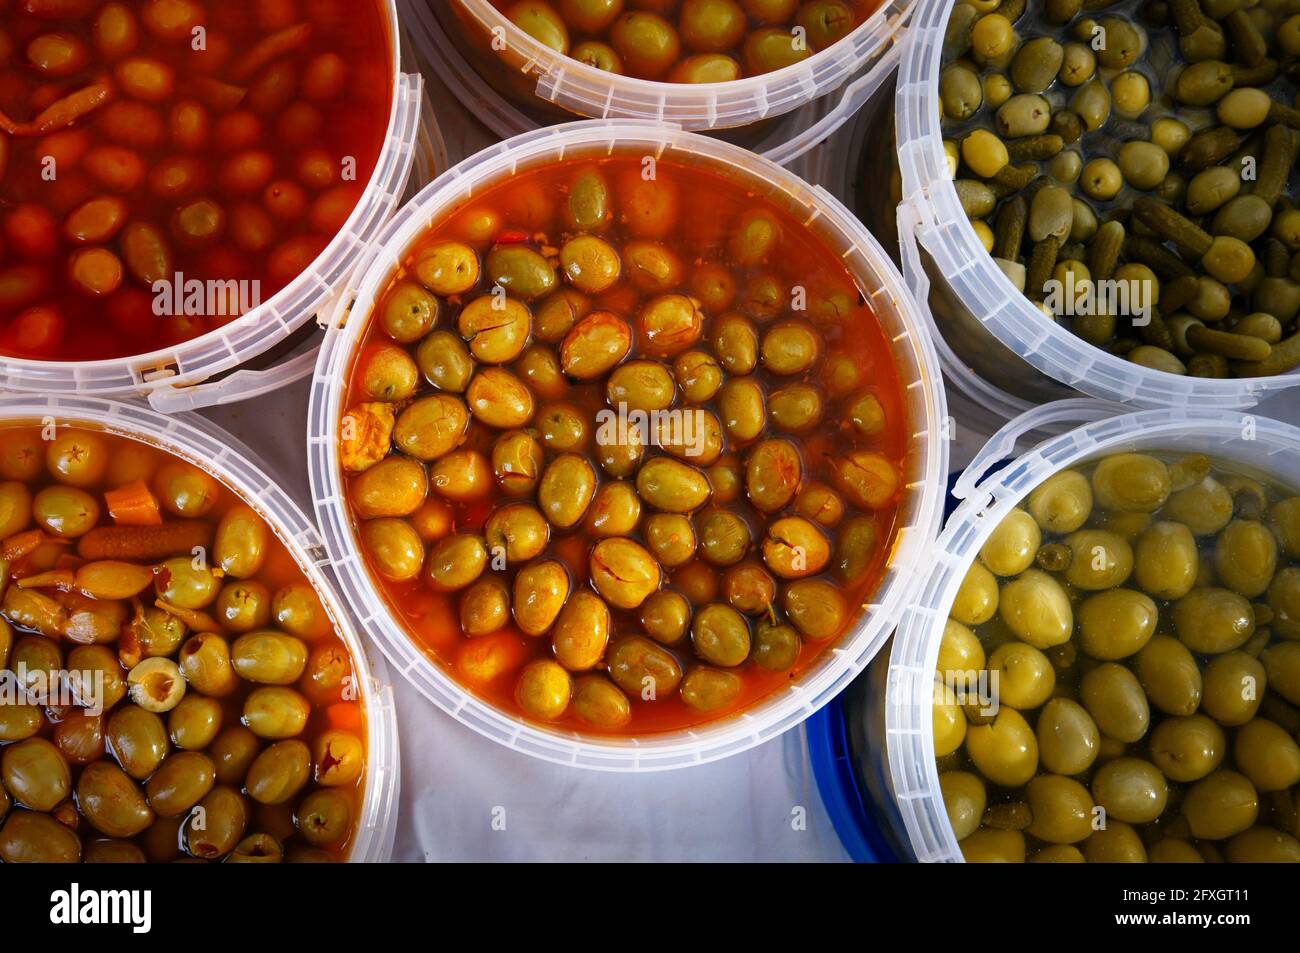 Types of spanish olives in the market Stock Photo - Alamy